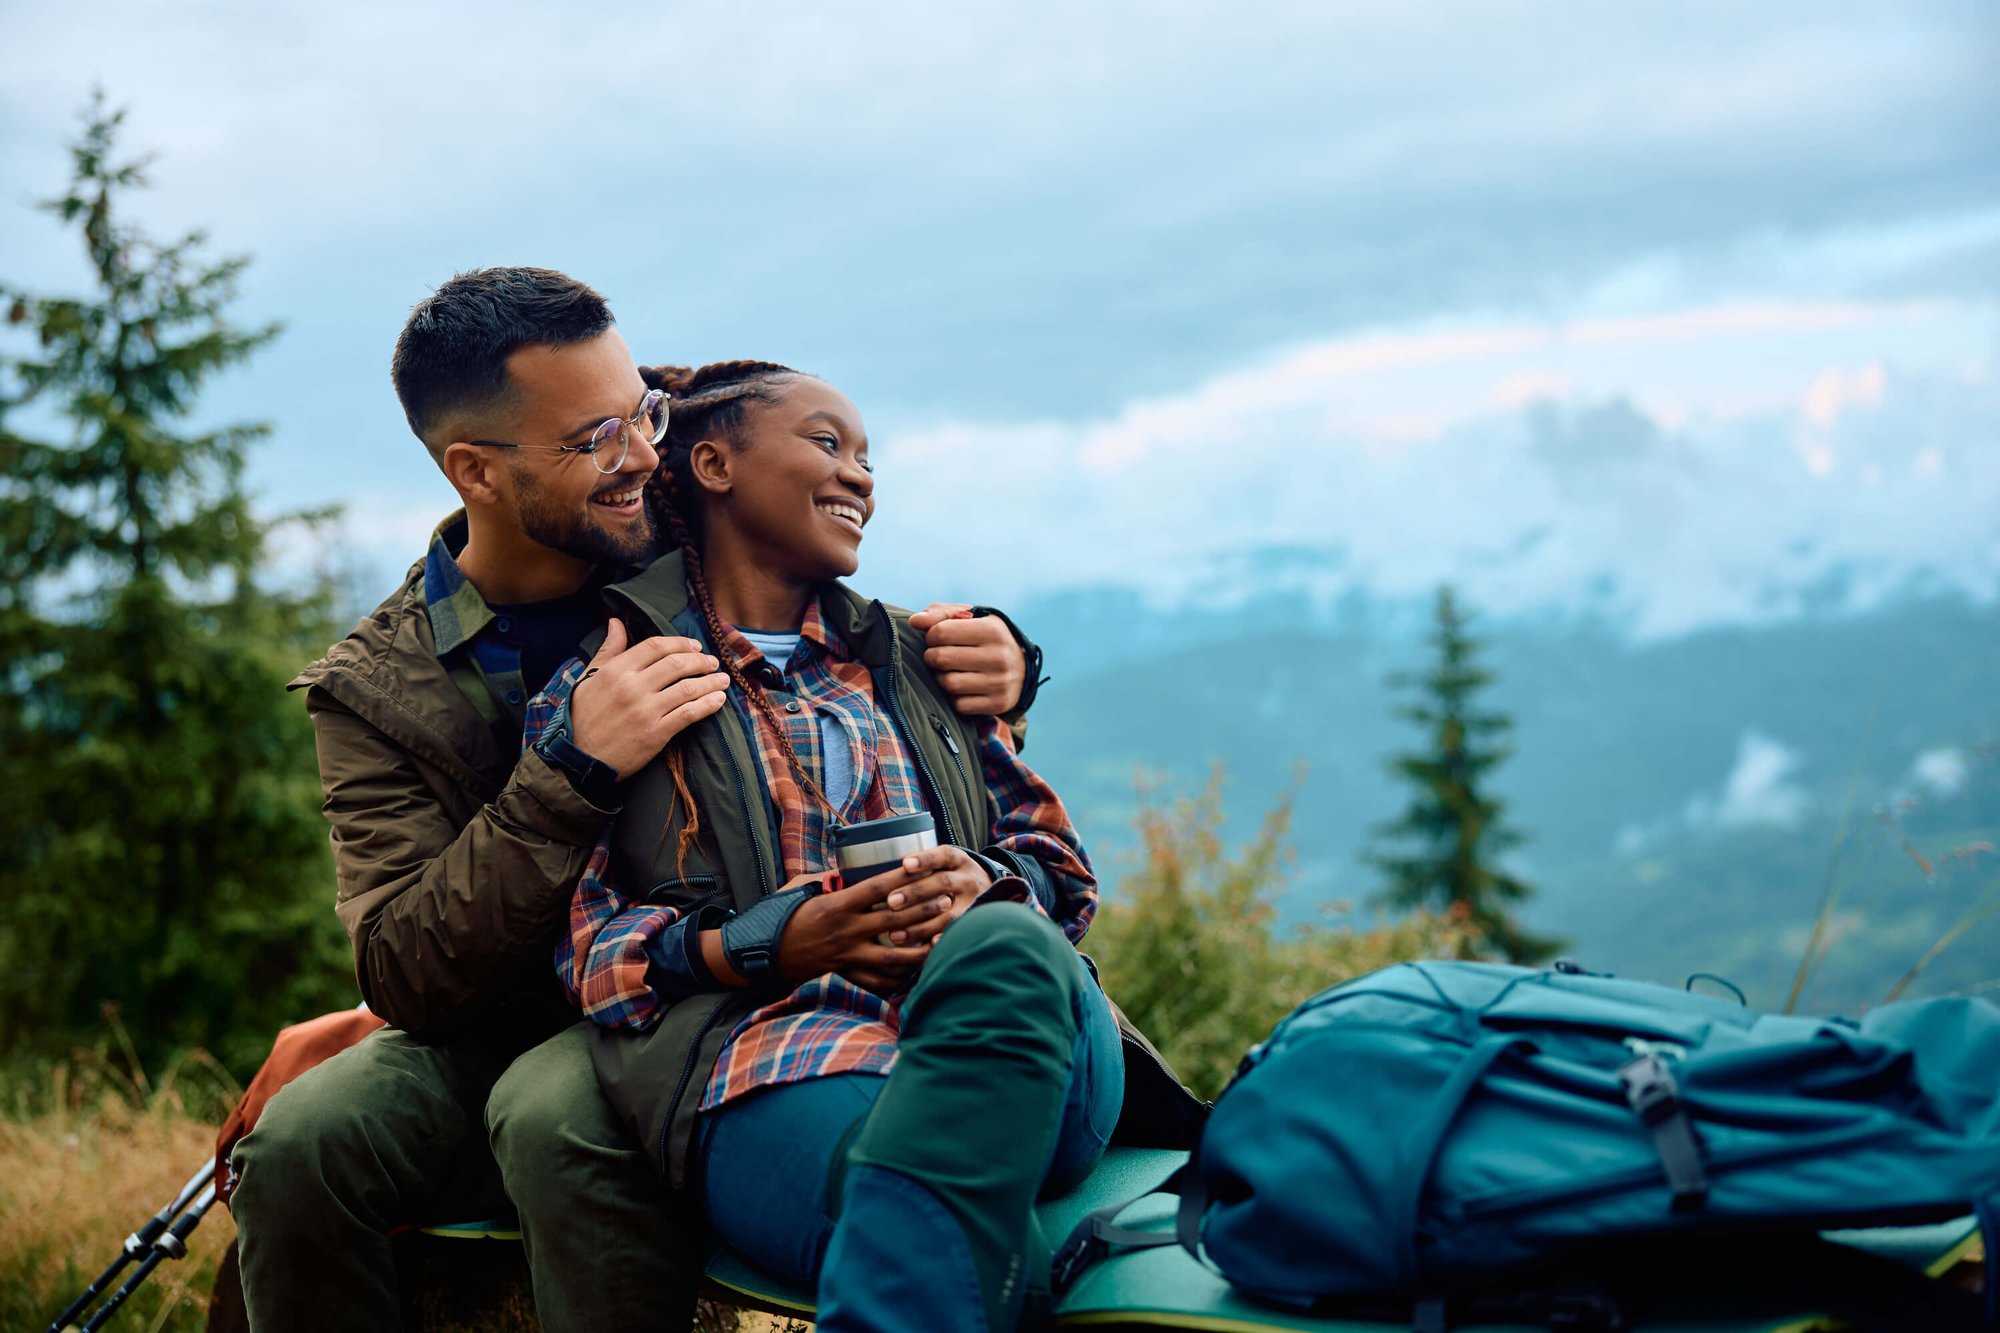 TN-Mental-Wellness-Couples-Therapy-black-man-and-lady-smiling-sitting-together-outside-in-forest